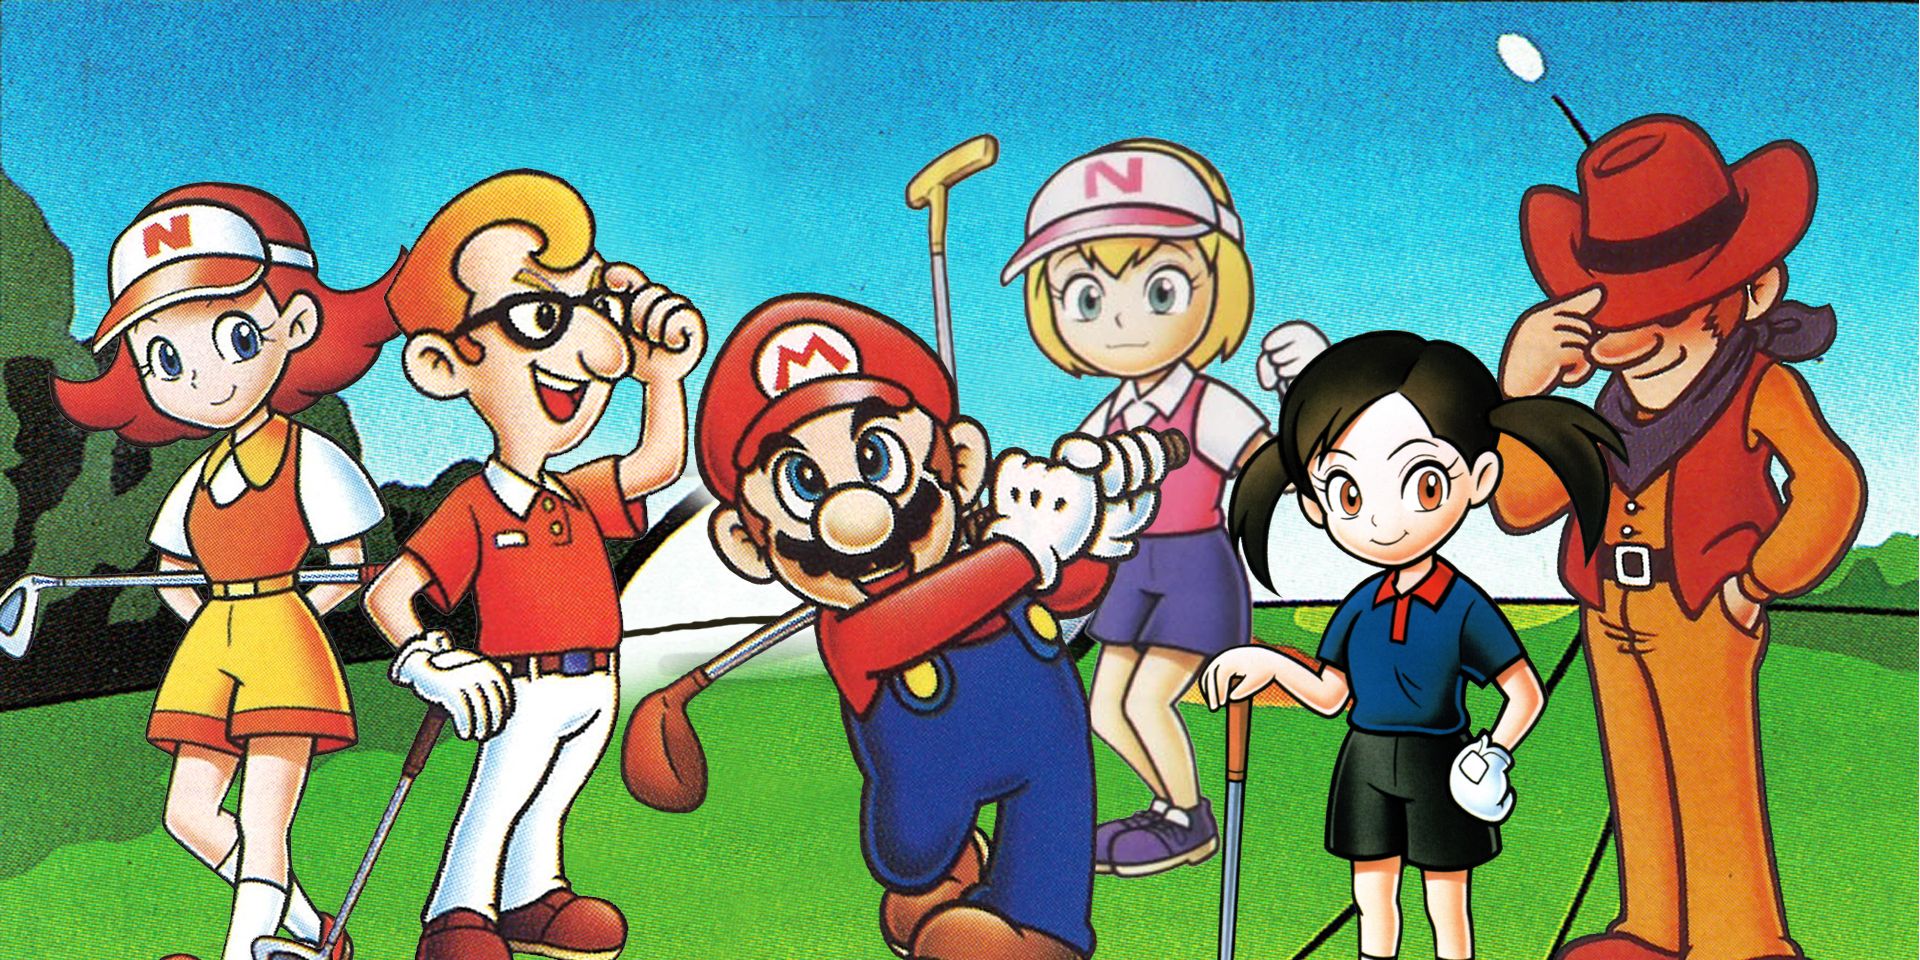 Mario and friends take to the fairway.